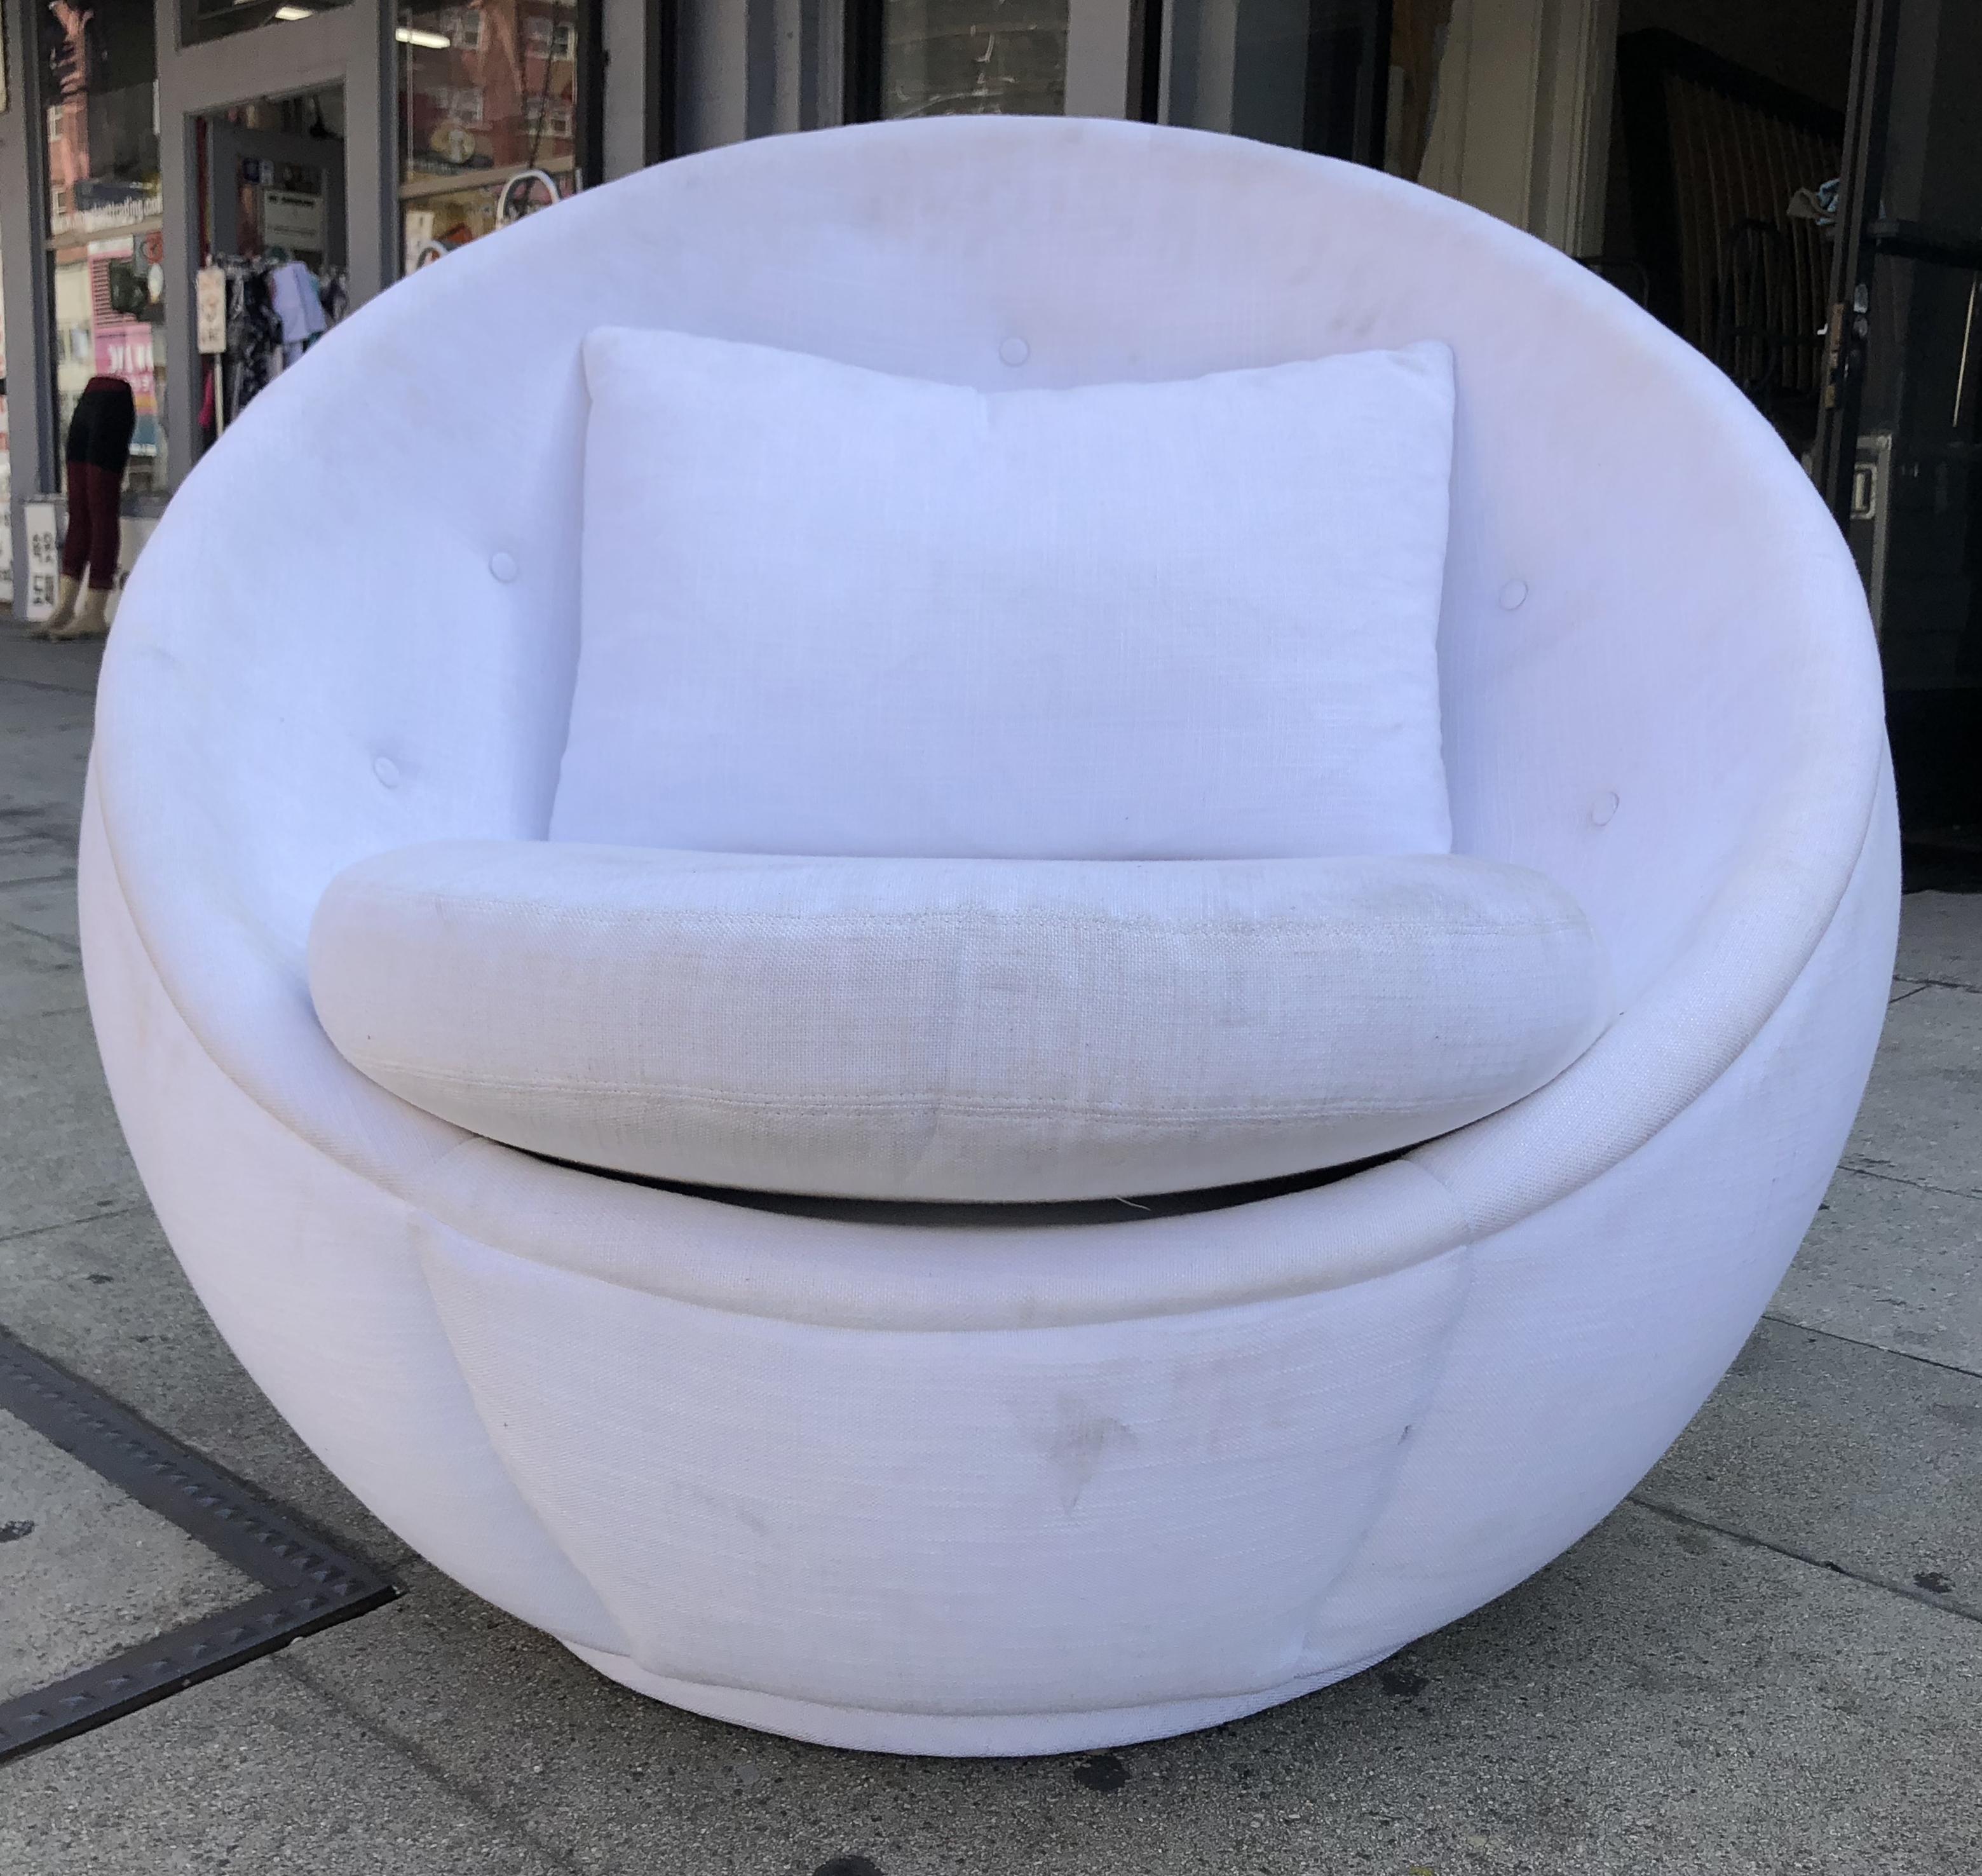 Stunning lounge chair in a swivel base designed by Milo Baughman and manufactured by Thayer Coggin.

The chair has a beautiful shape and is seating in a swivel base, the chair is upholstered in a white colored fabric and although it looks dirty we